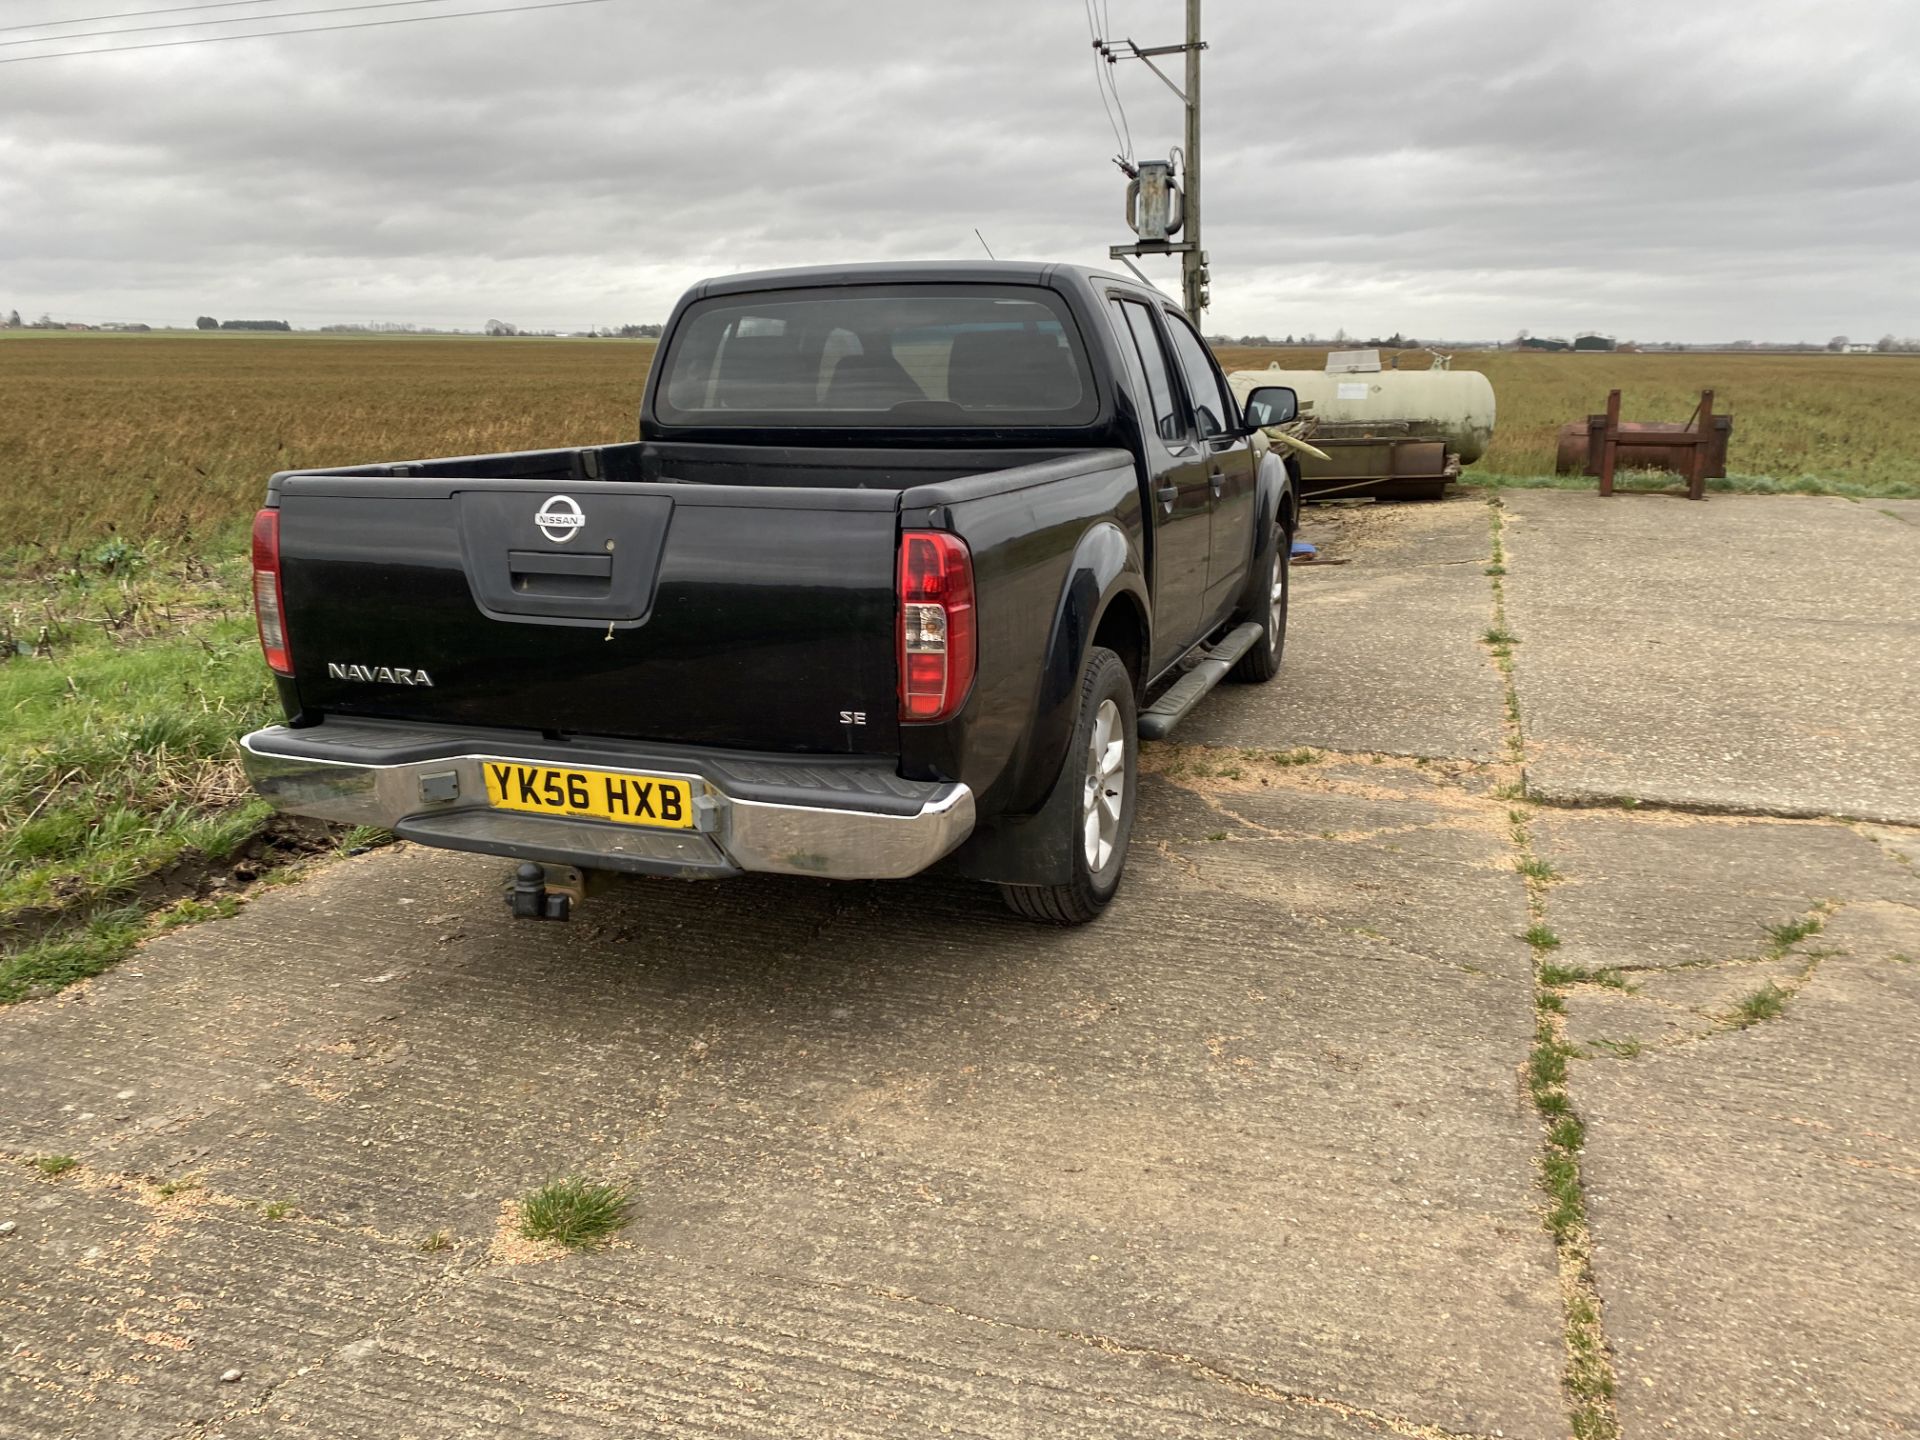 (06) Nissan Navara SE twin cab (diesel) pickup truck with tow bar, alloy wheels, Black, CD player, - Image 2 of 4